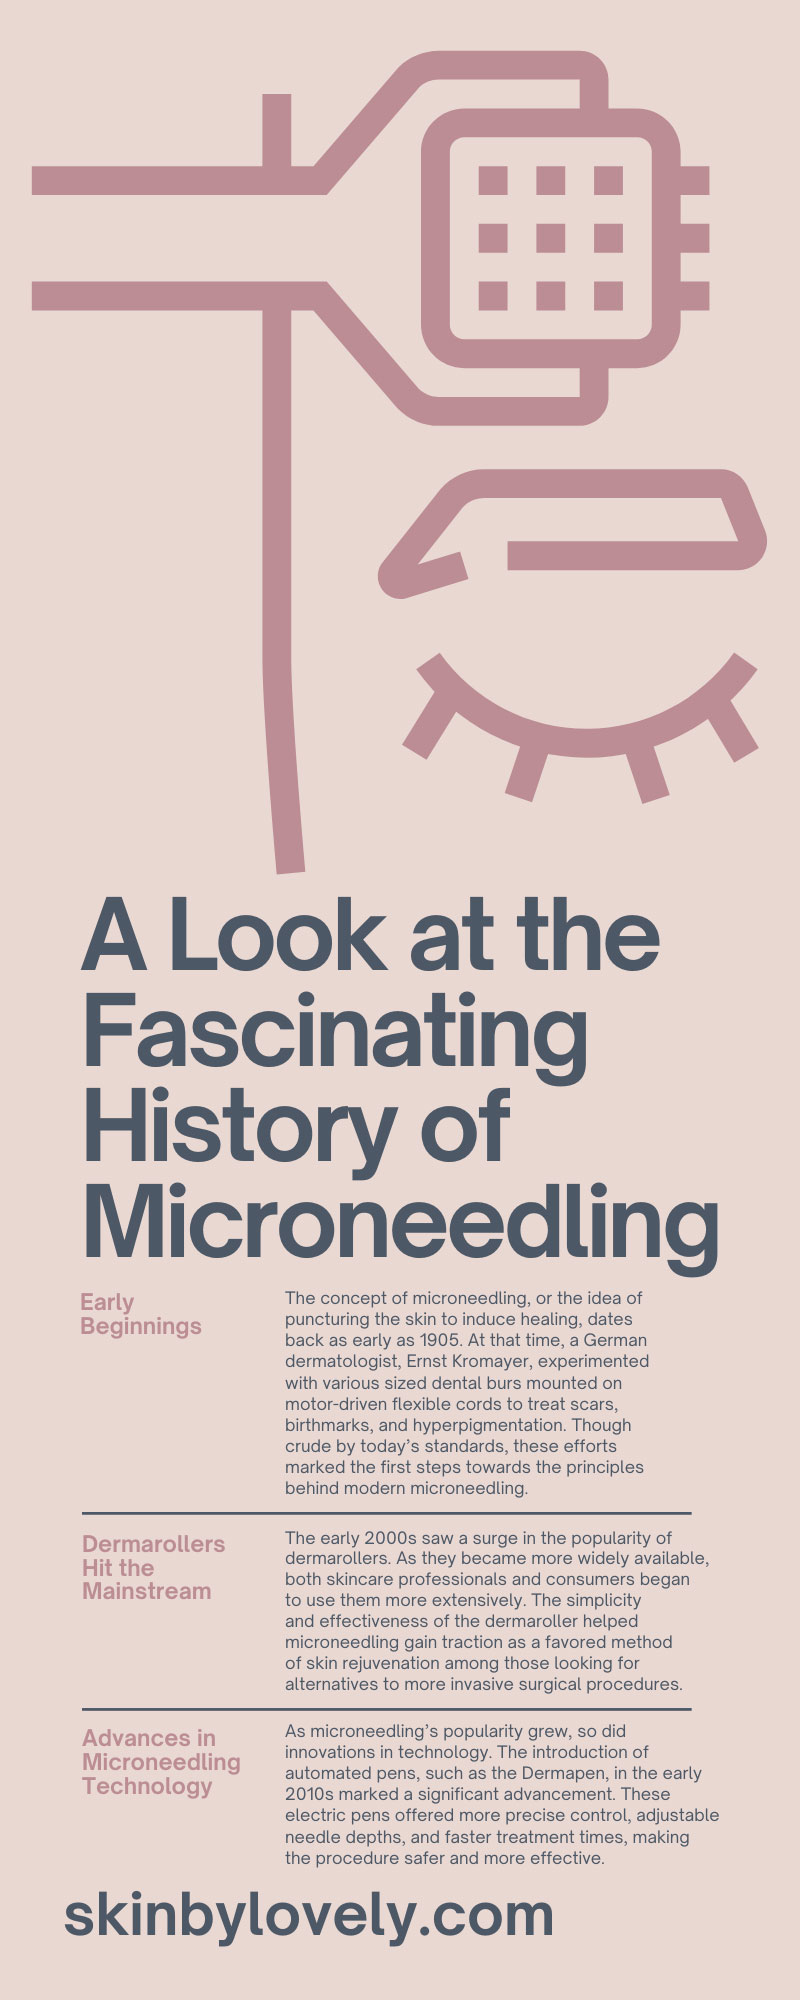 A Look at the Fascinating History of Microneedling